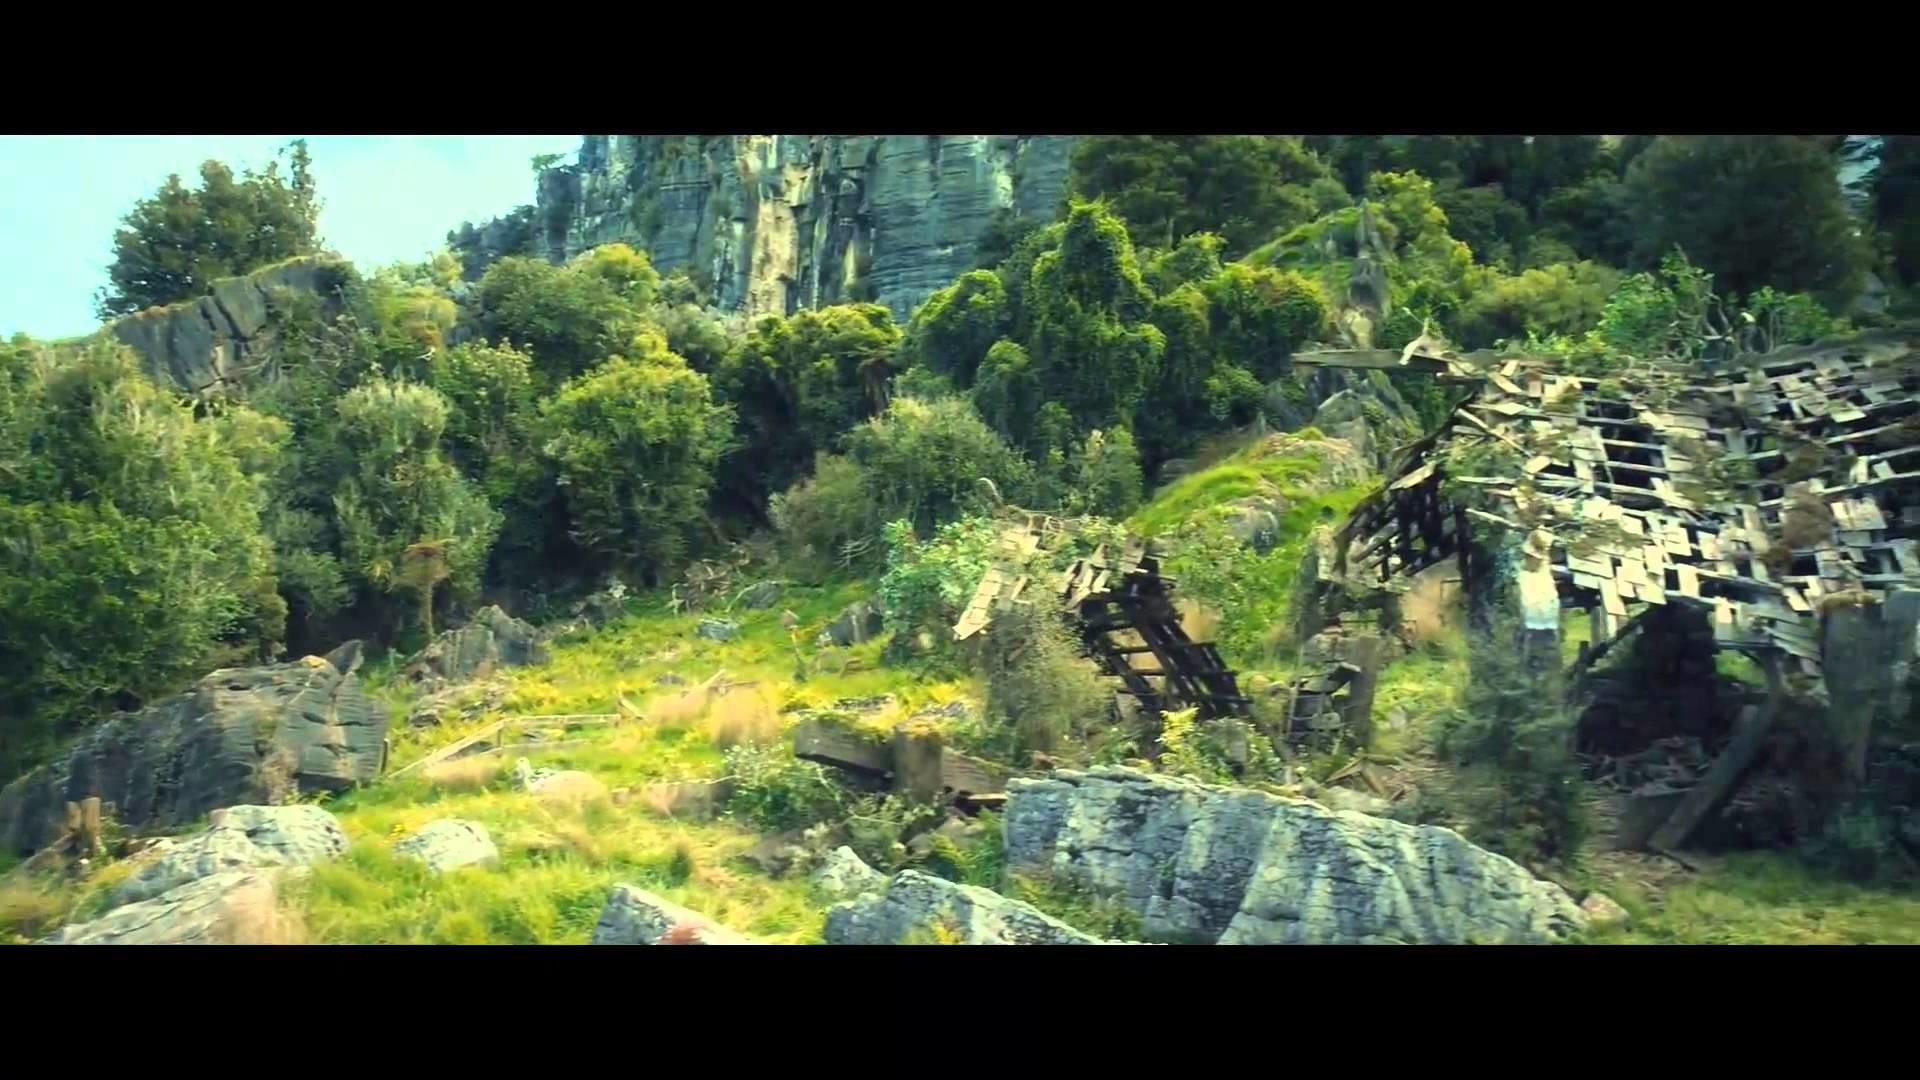 1920x1080 New Zealand film locations used in the movies - Home of Middle Earth -  Unravel Travel TV - YouTube